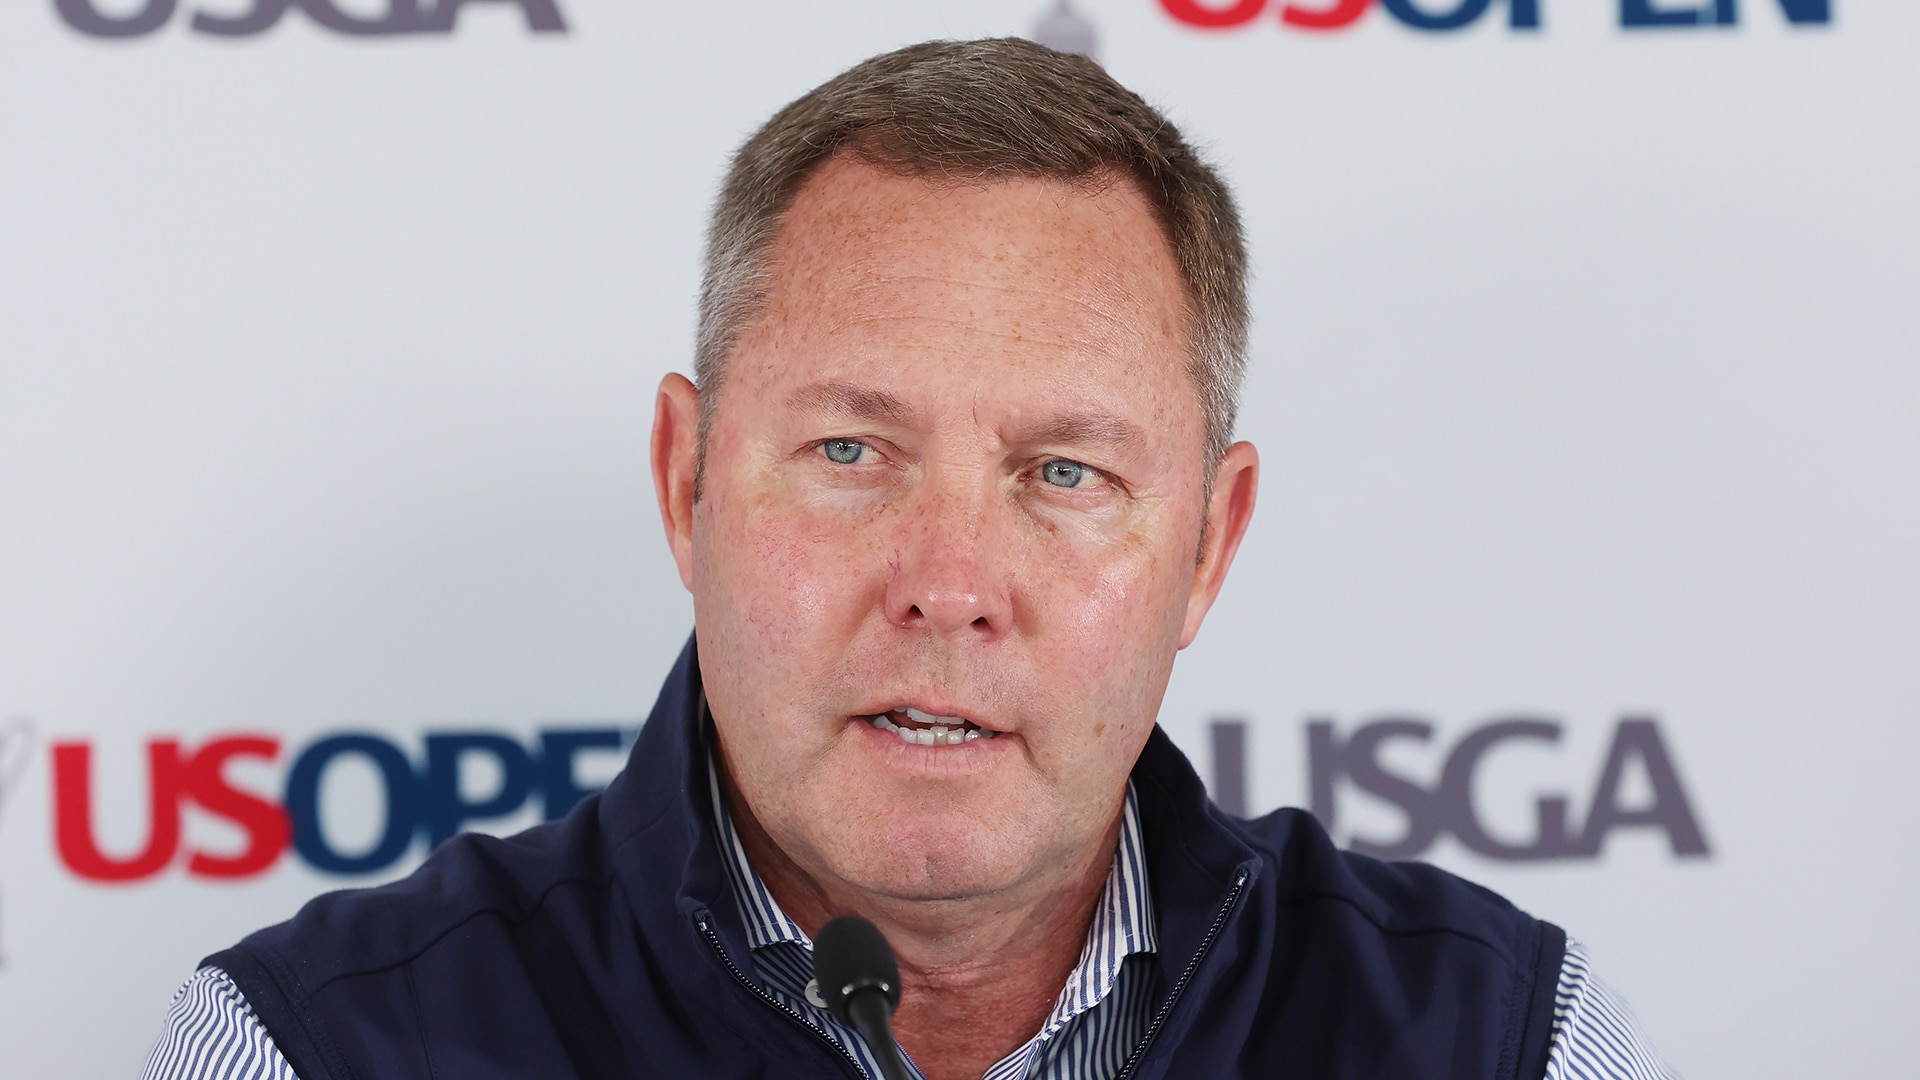 Mike Whan calls into radio show to give his thoughts on Rory’s drive, distance